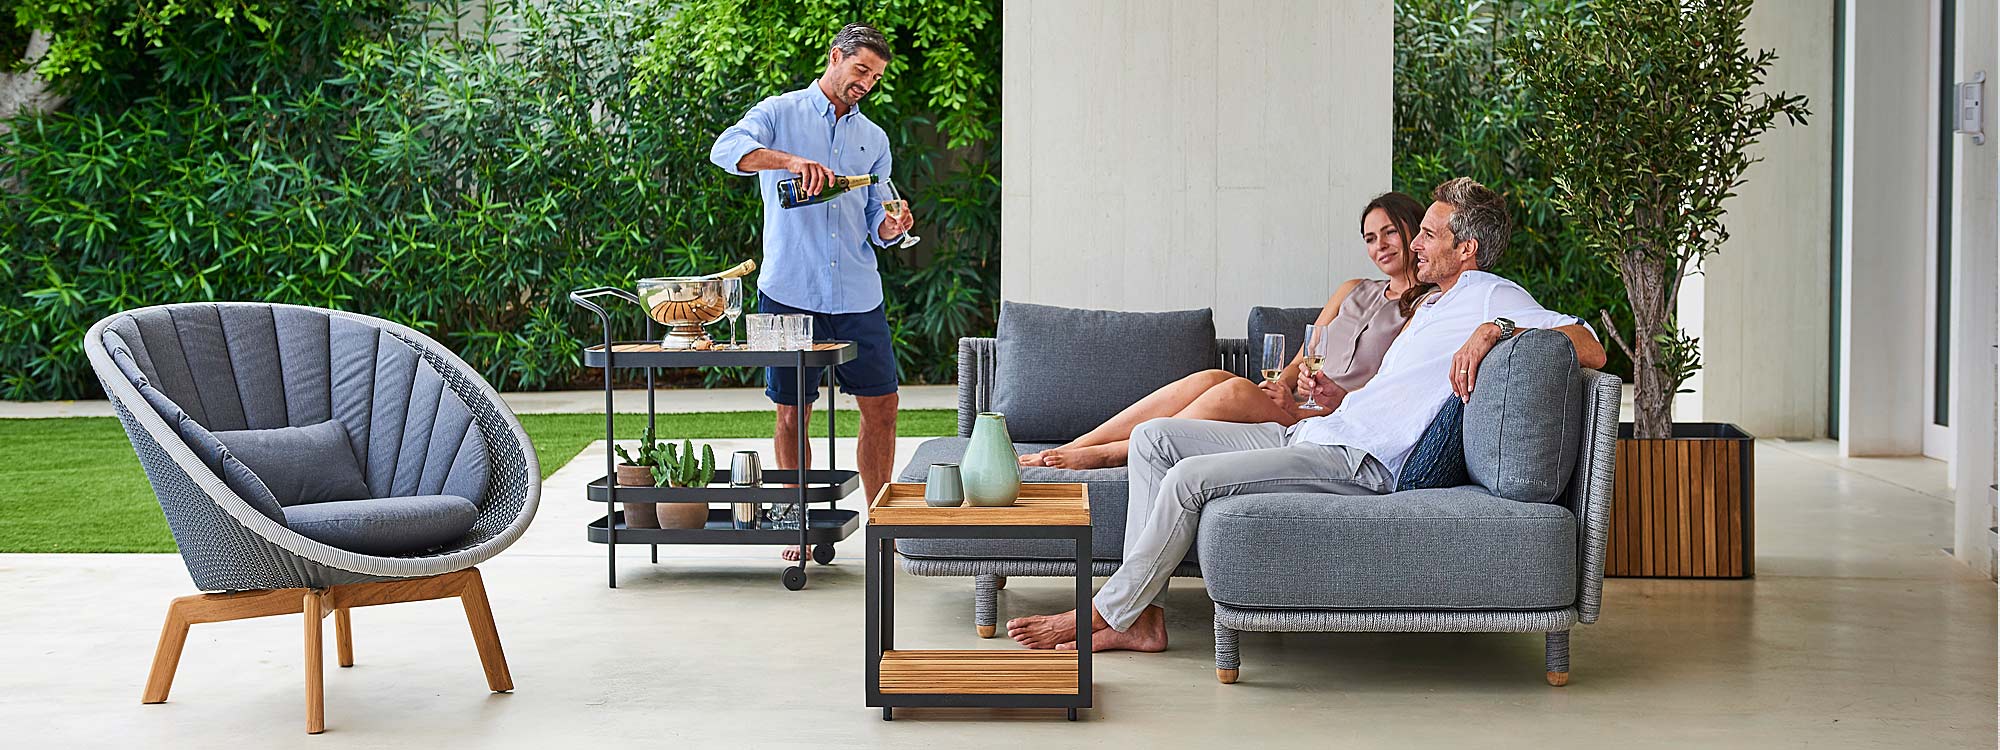 Image of man pouring drinks for guests sat on Moments grey corner sofa and Peacock lounge chair by Cane-line